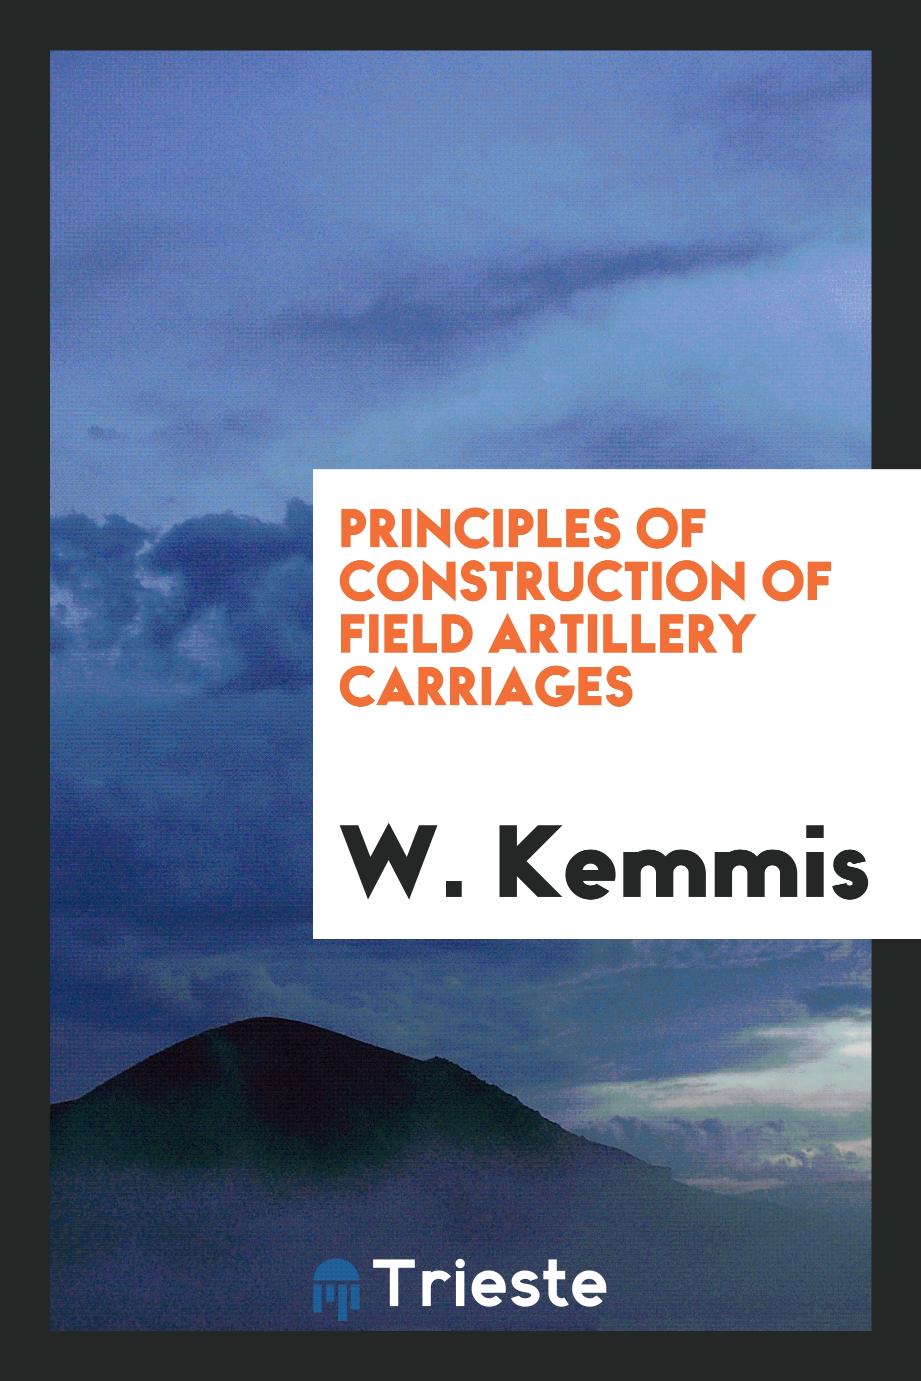 Principles of Construction of Field Artillery Carriages